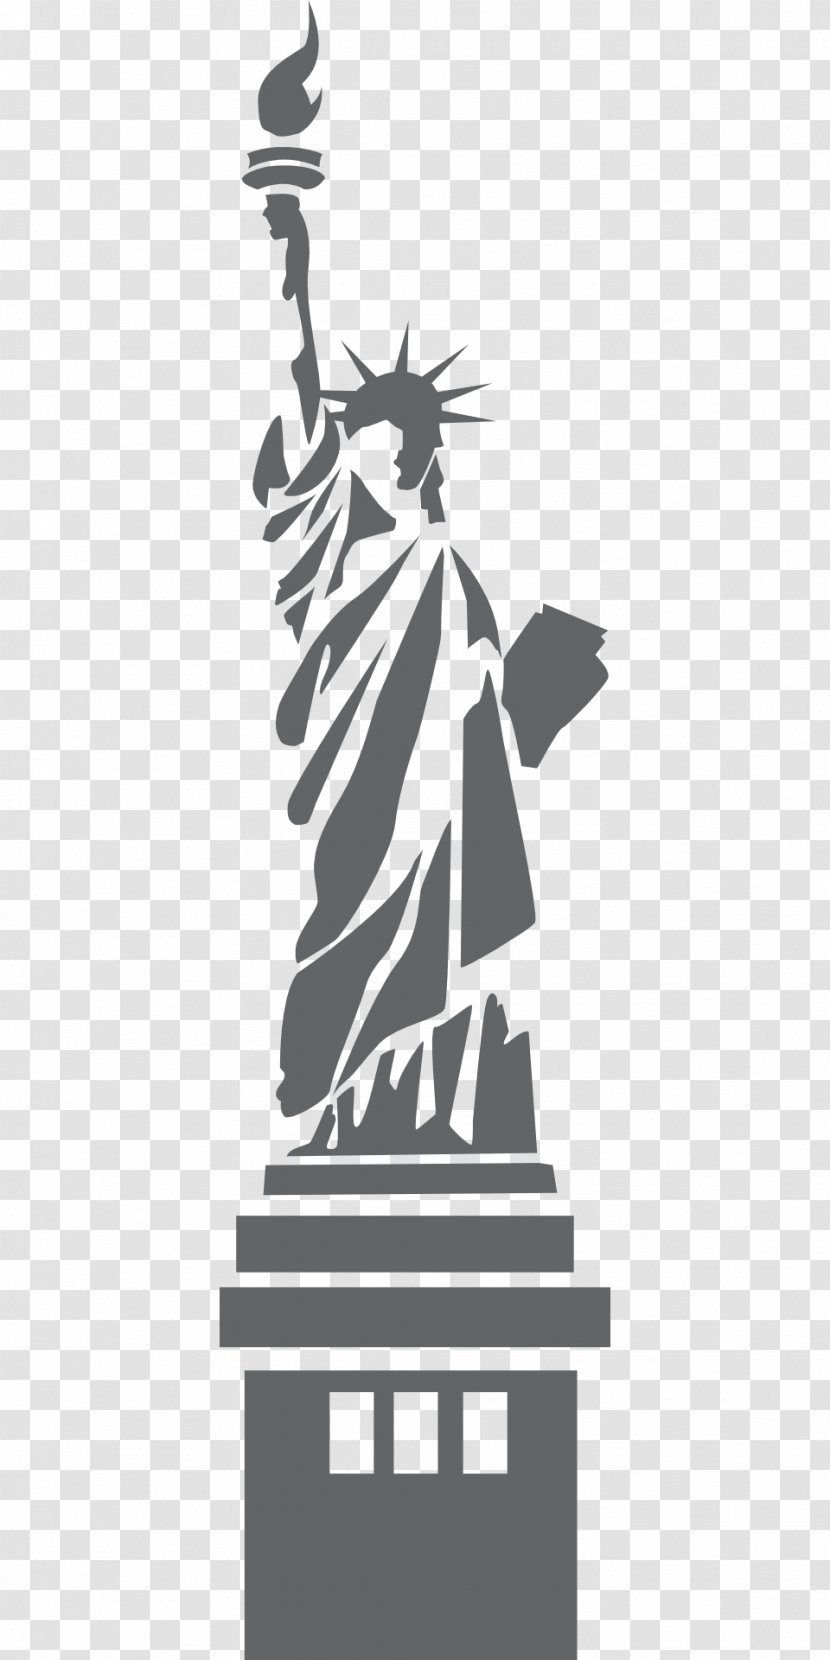 Statue Of Liberty Clip Art - Scalable Vector Graphics - Silhouette Transparent PNG